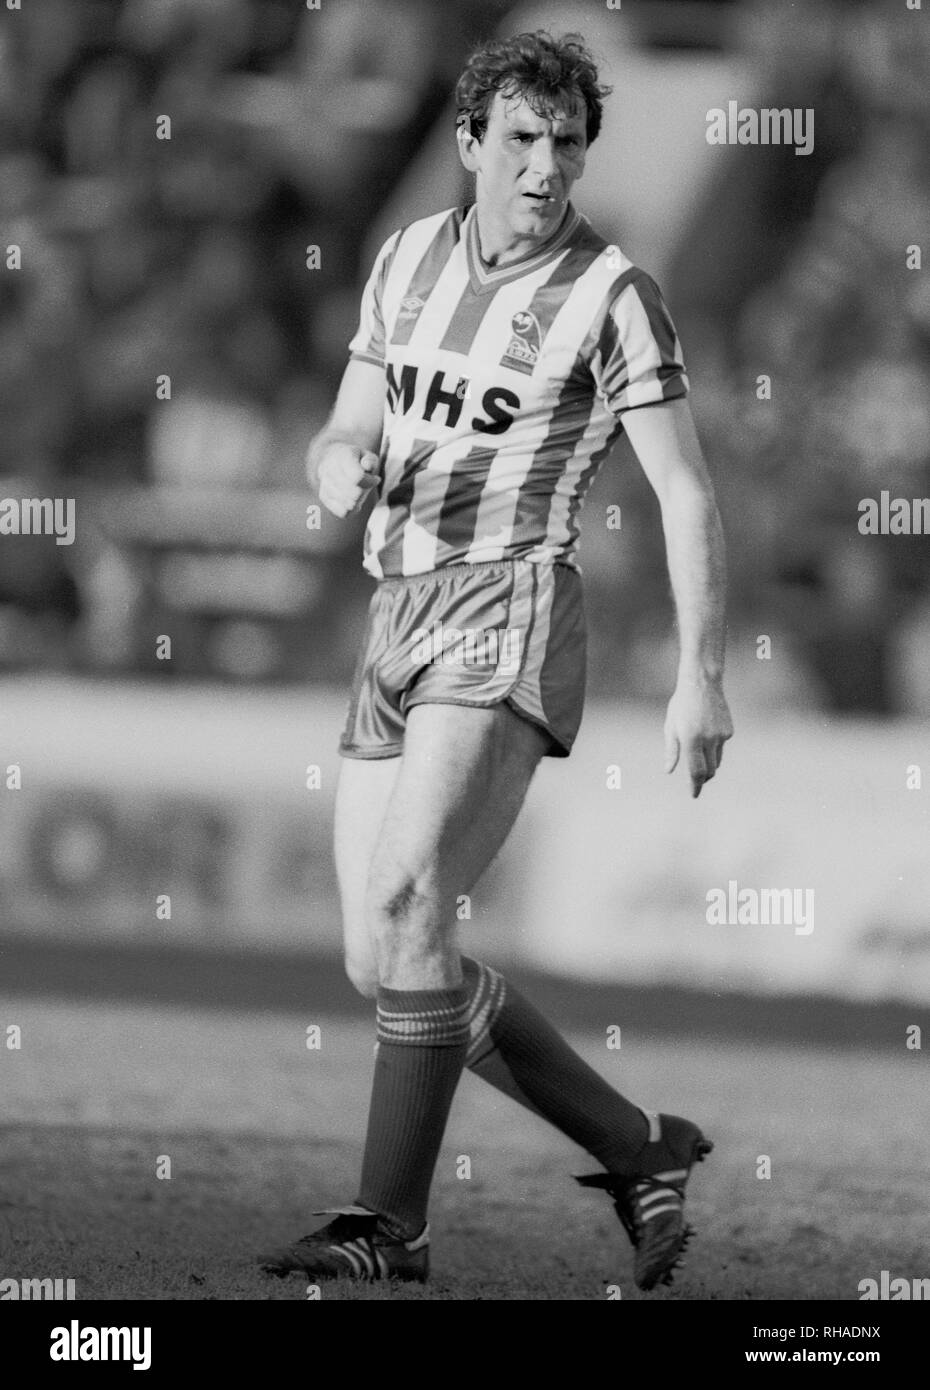 LAWRIE MADDEN, SHEFFIELD WEDNESDAY FC, , 1985 Banque D'Images